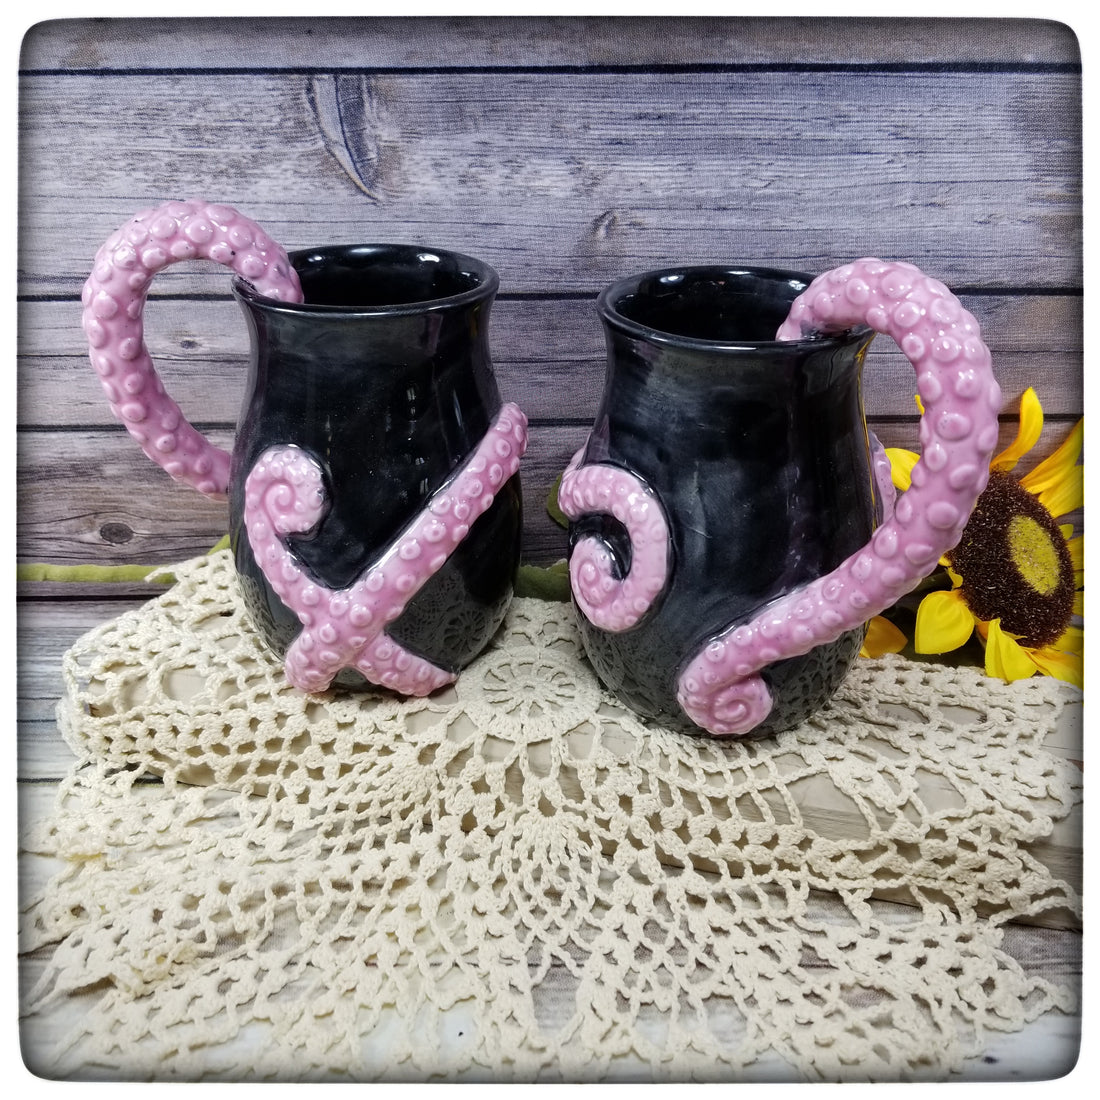 This Week Only: Tentacle mugs (seconds)